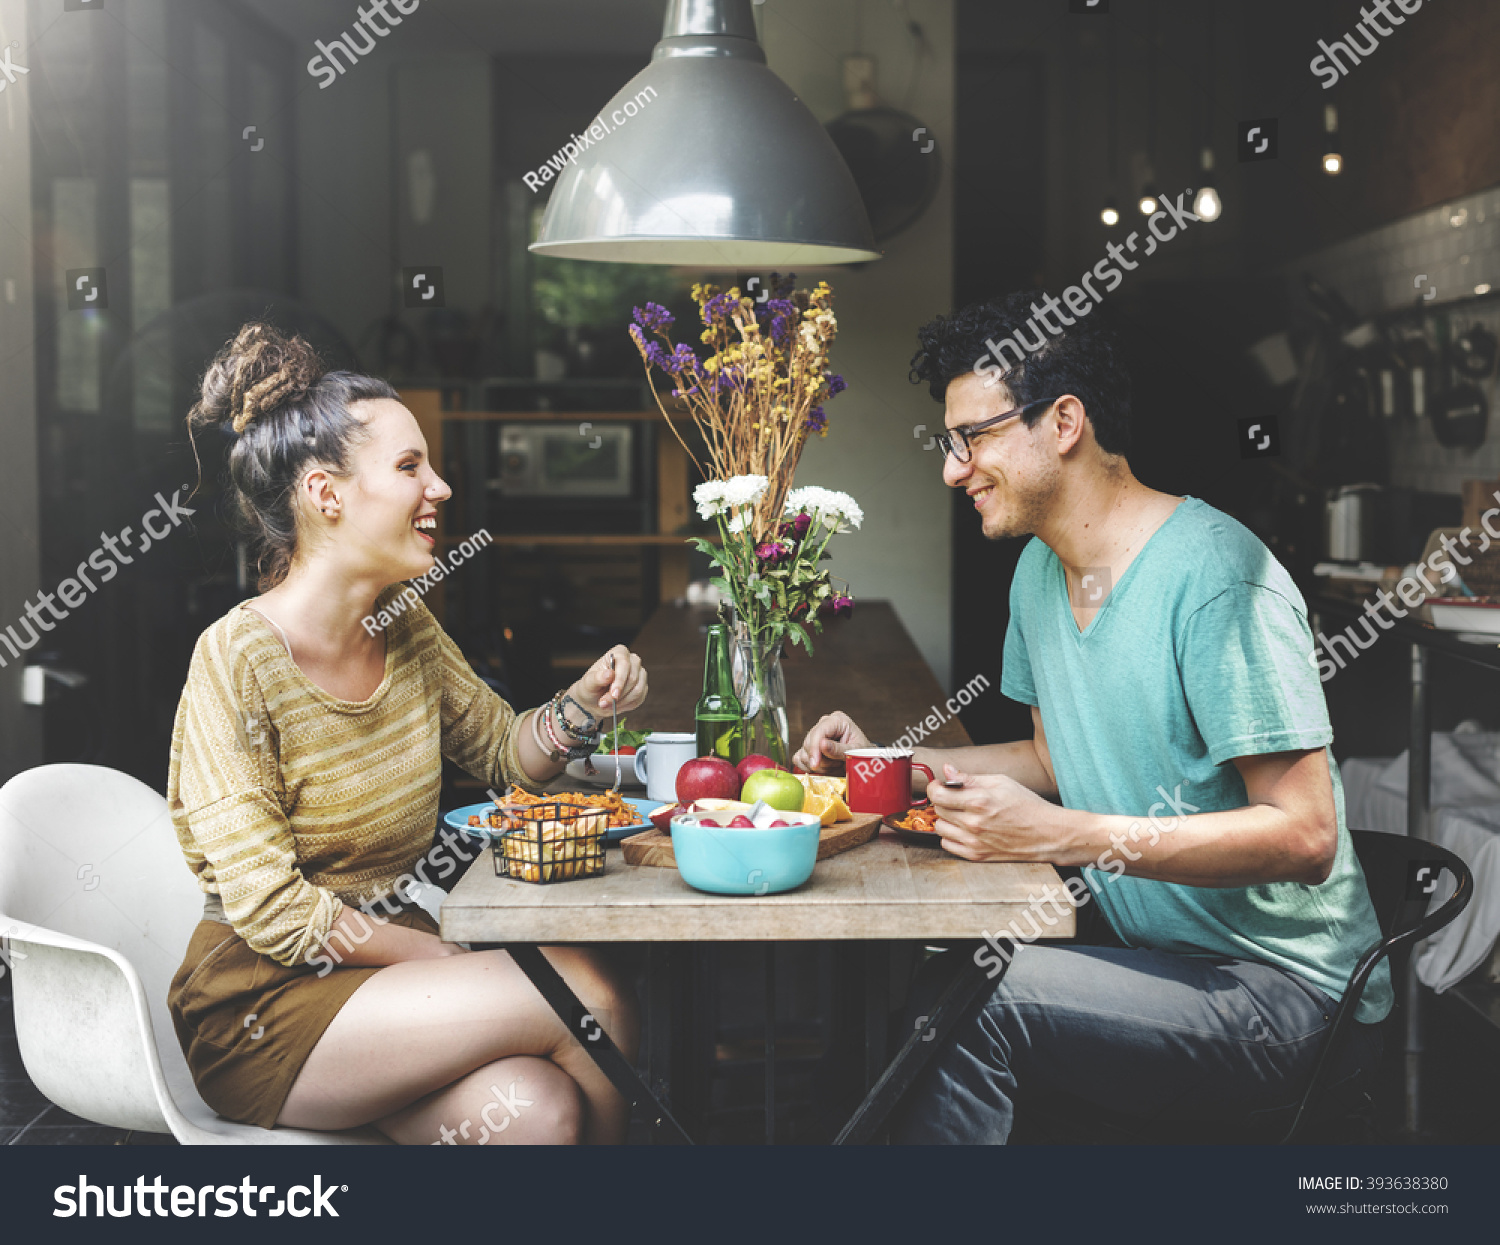 Couple Eating Food Meal Dating Romance Love Concept #393638380